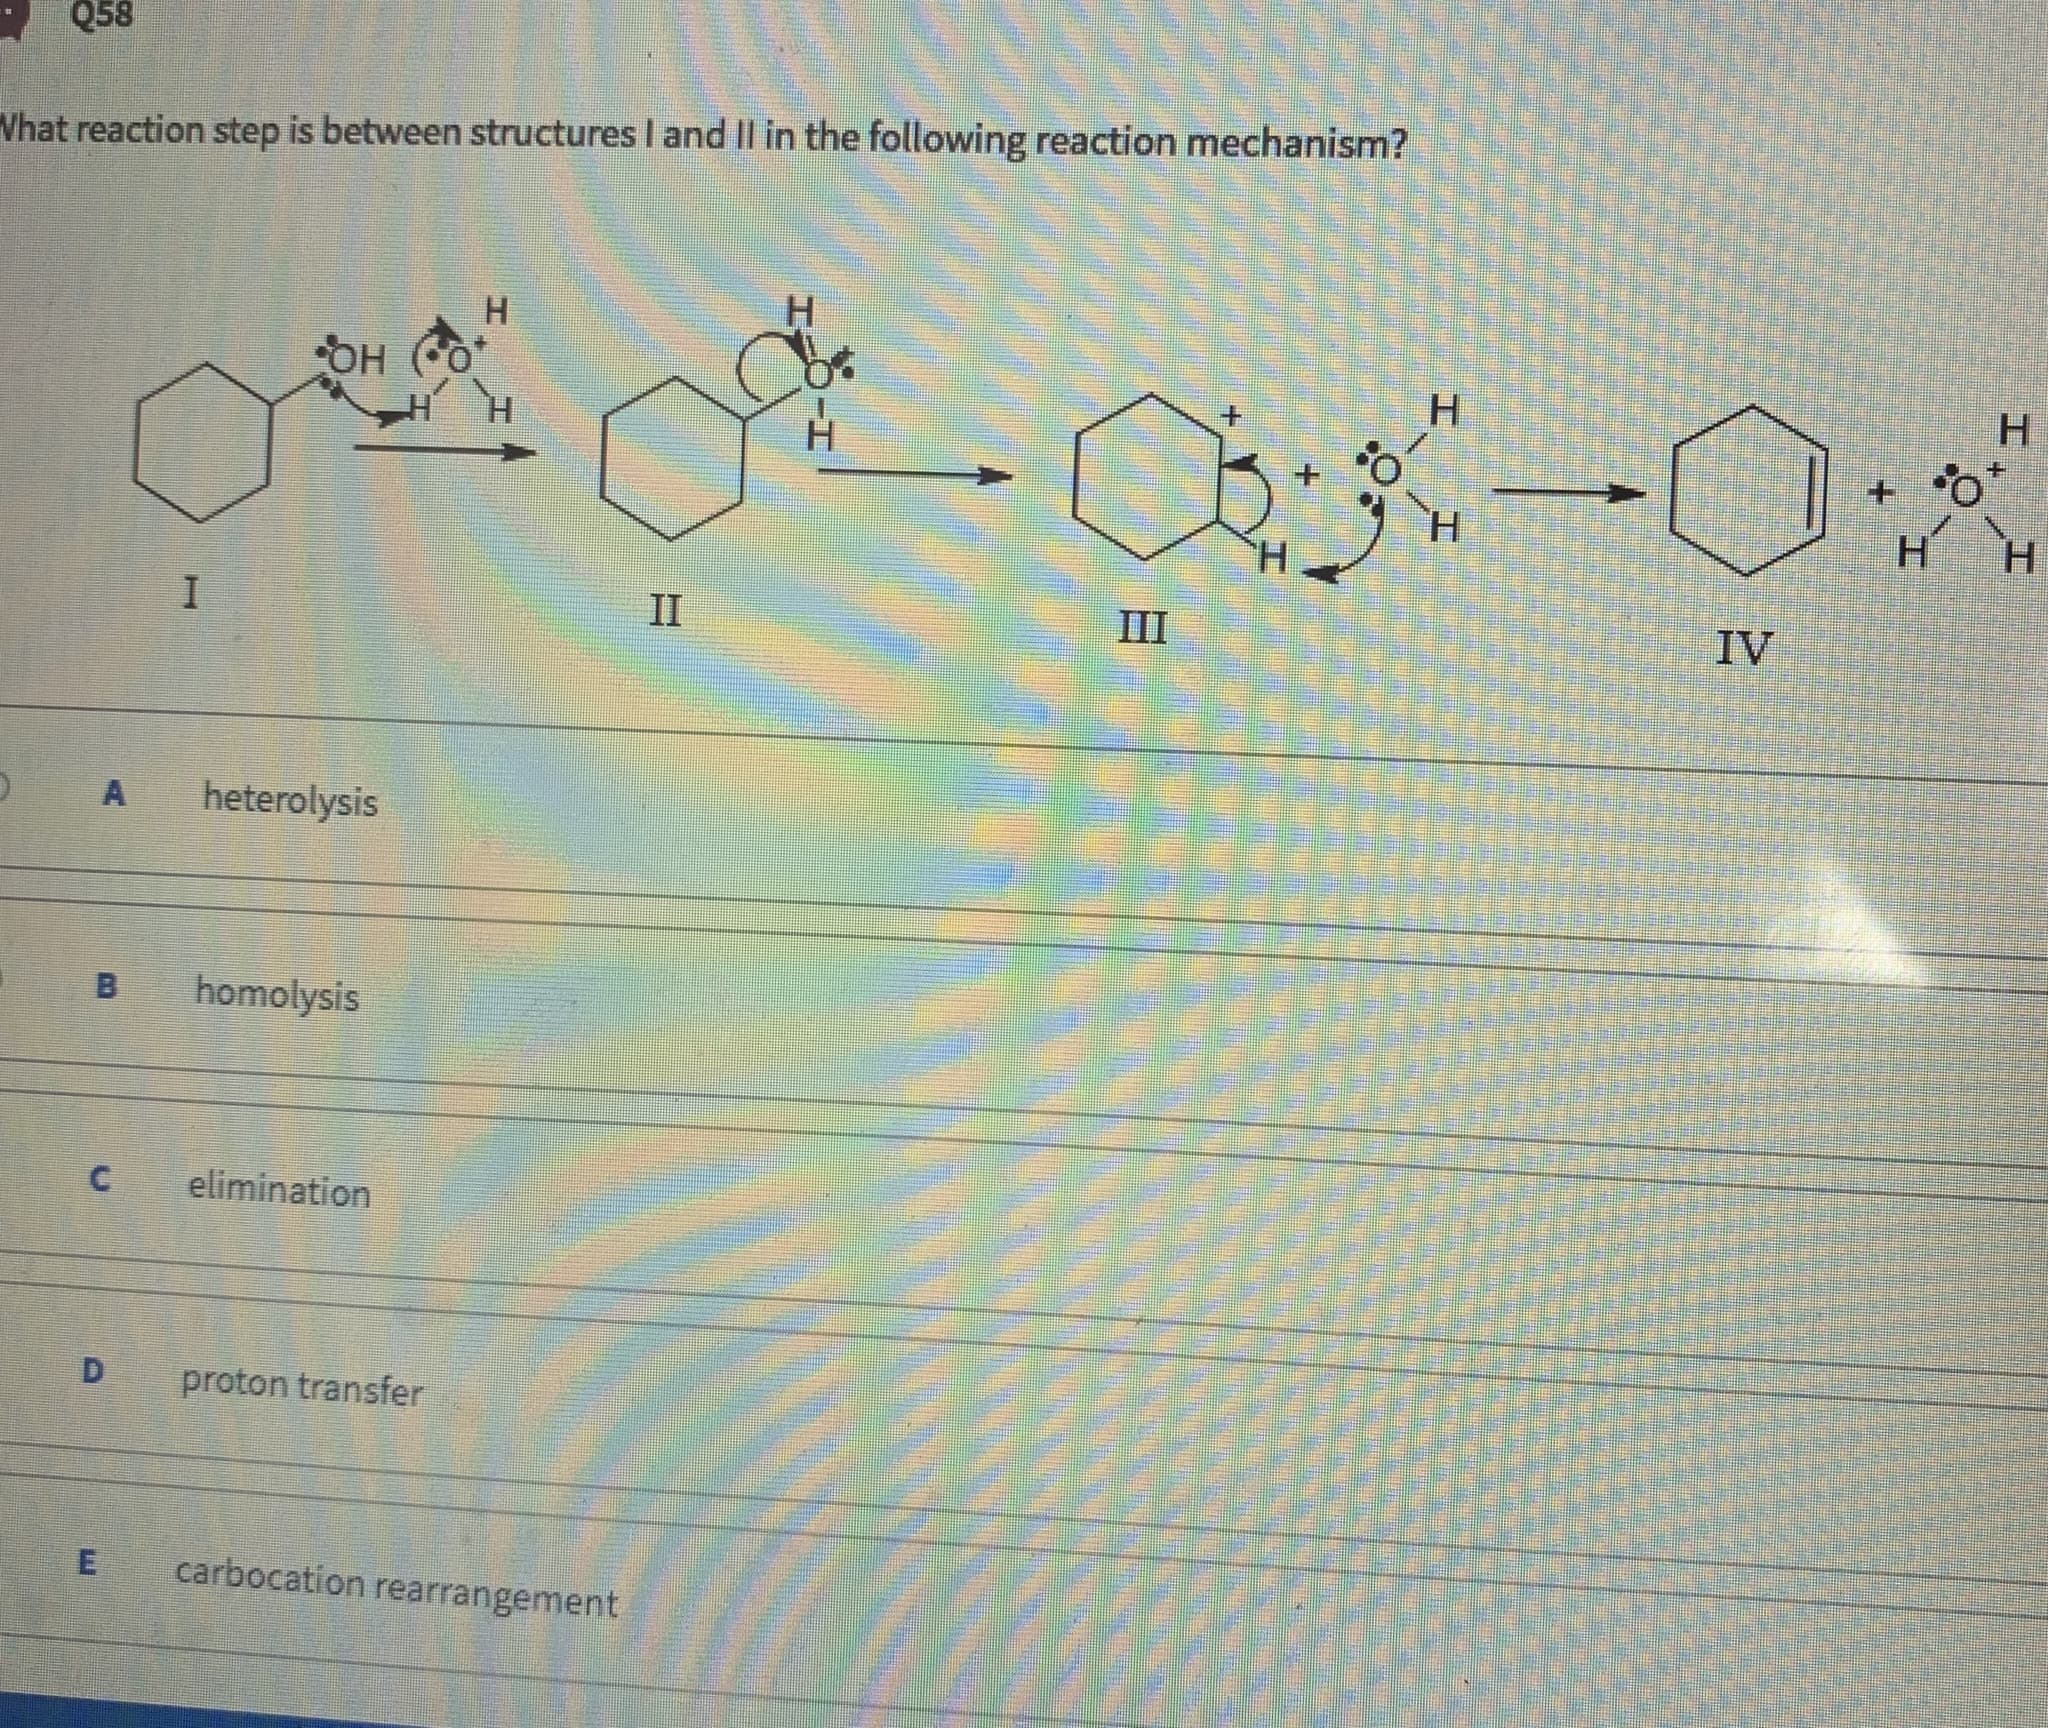 "hat reaction step is between structures I and II in the following reaction mechanism?
